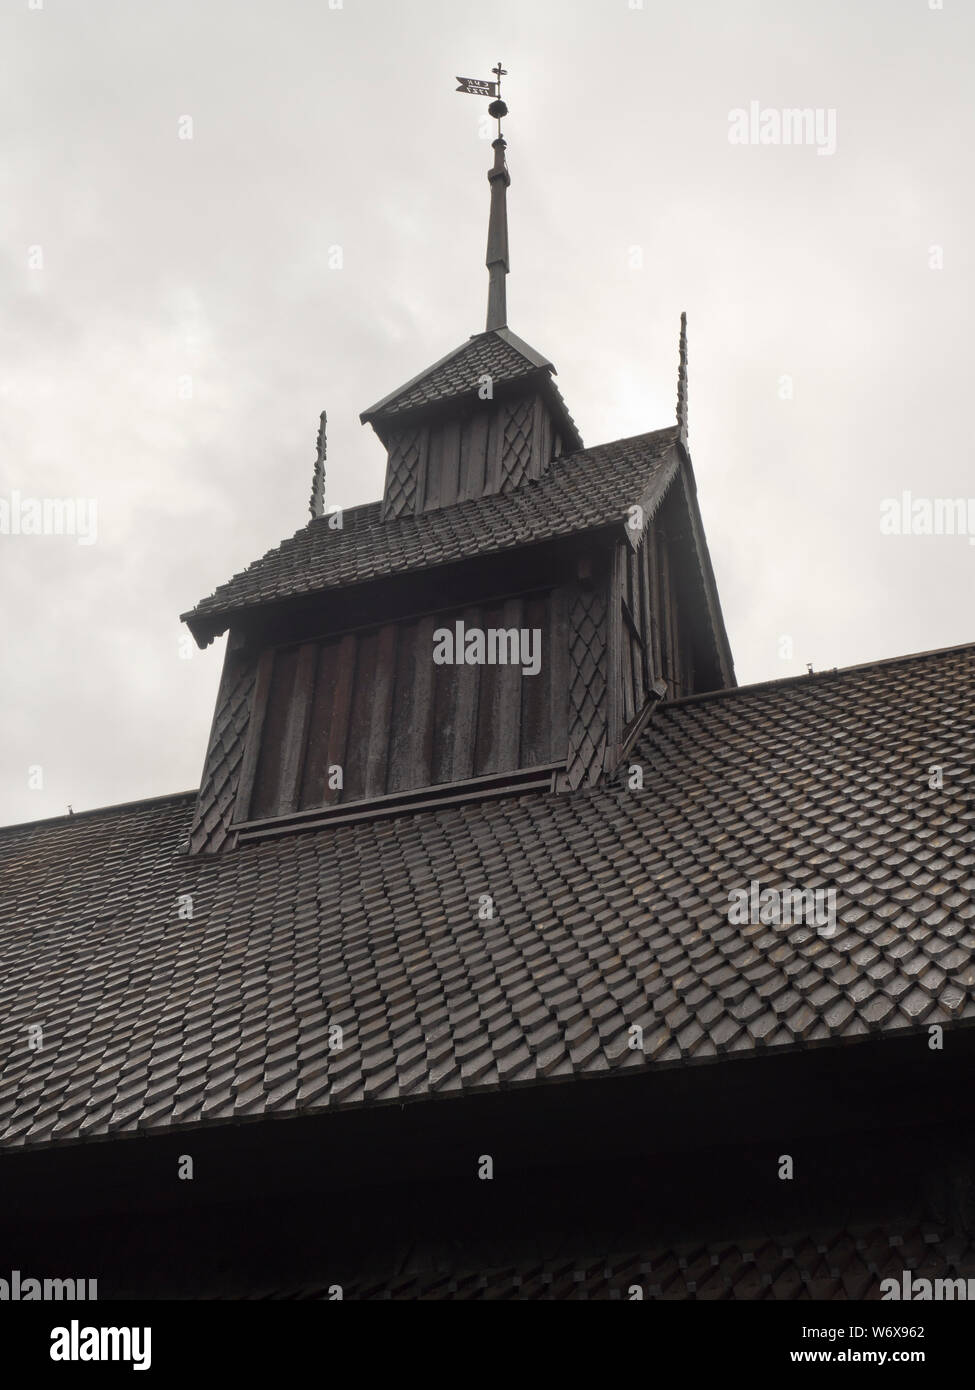 Eidsborg Stave church from the medieval period, a prime example of Norwegian wooden architecture and a tourist attraction, roof and steeple Stock Photo